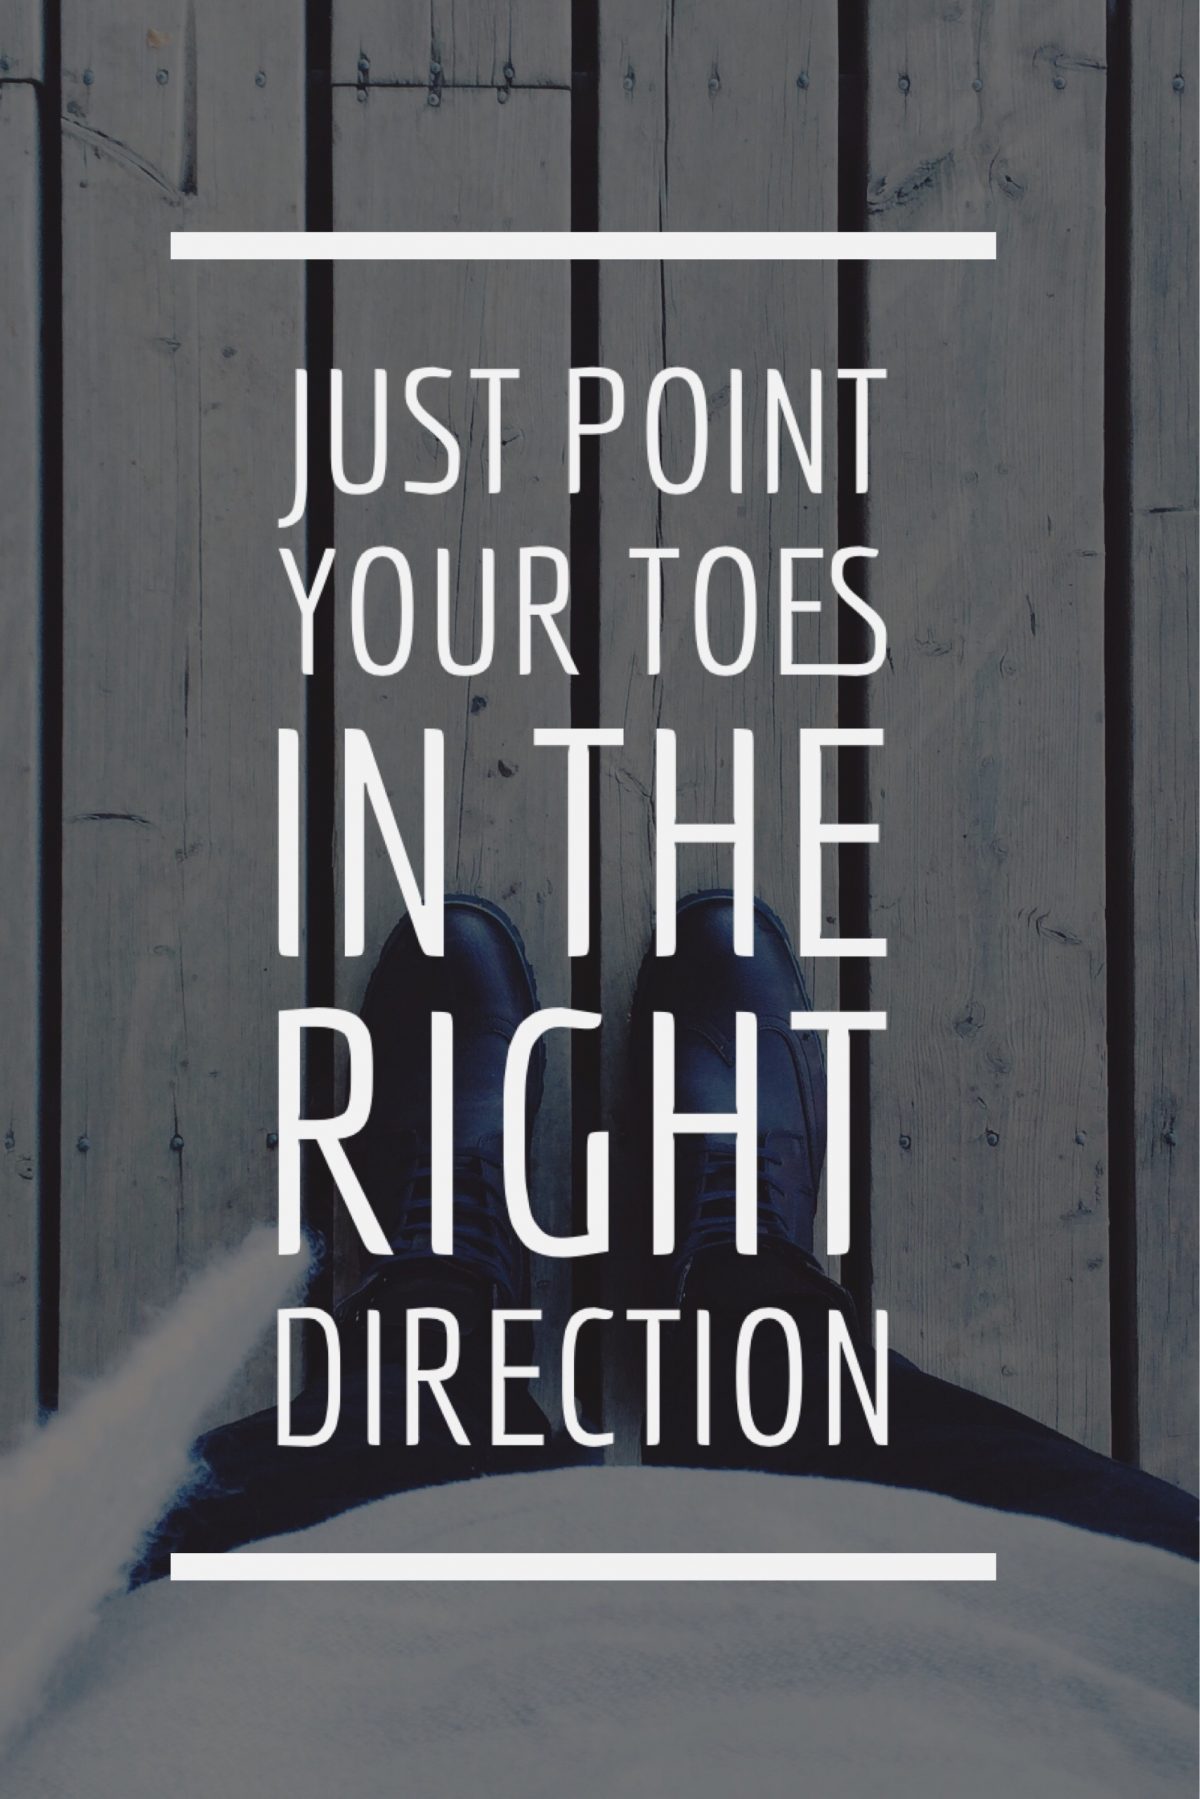 Just point your toes in the right direction 